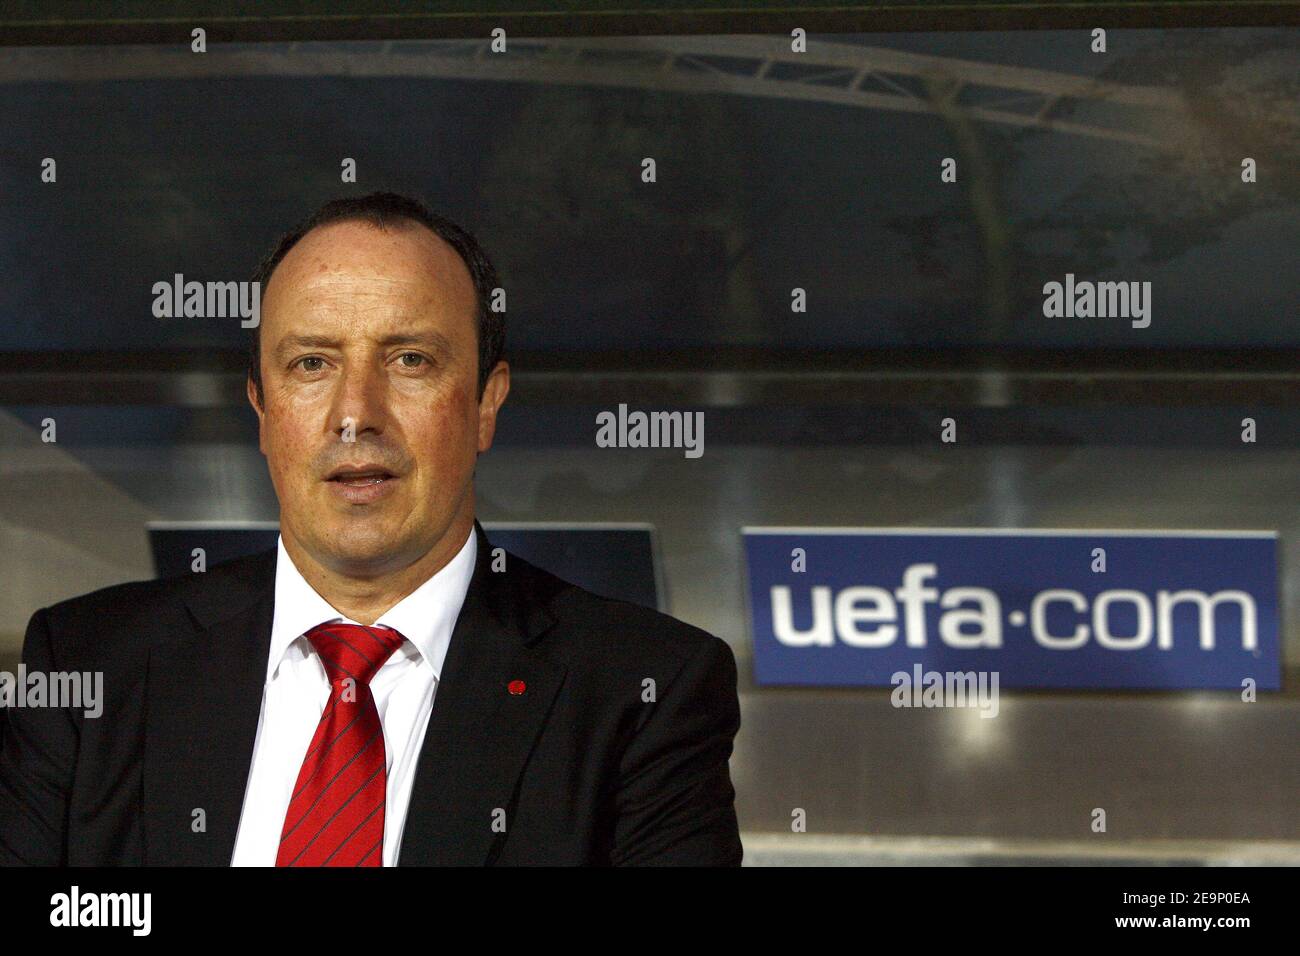 Liverpool's coach Rafael Benitez during the UEFA Champions League, Group C, Girondins de Bordeaux vs Liverpool FC at the Stade Chaban-Delmas in Bordeaux, France on October 18, 2006. Liverpool won 1-0. Photo by Christian Liewig/ABACAPRESS.COM Stock Photo